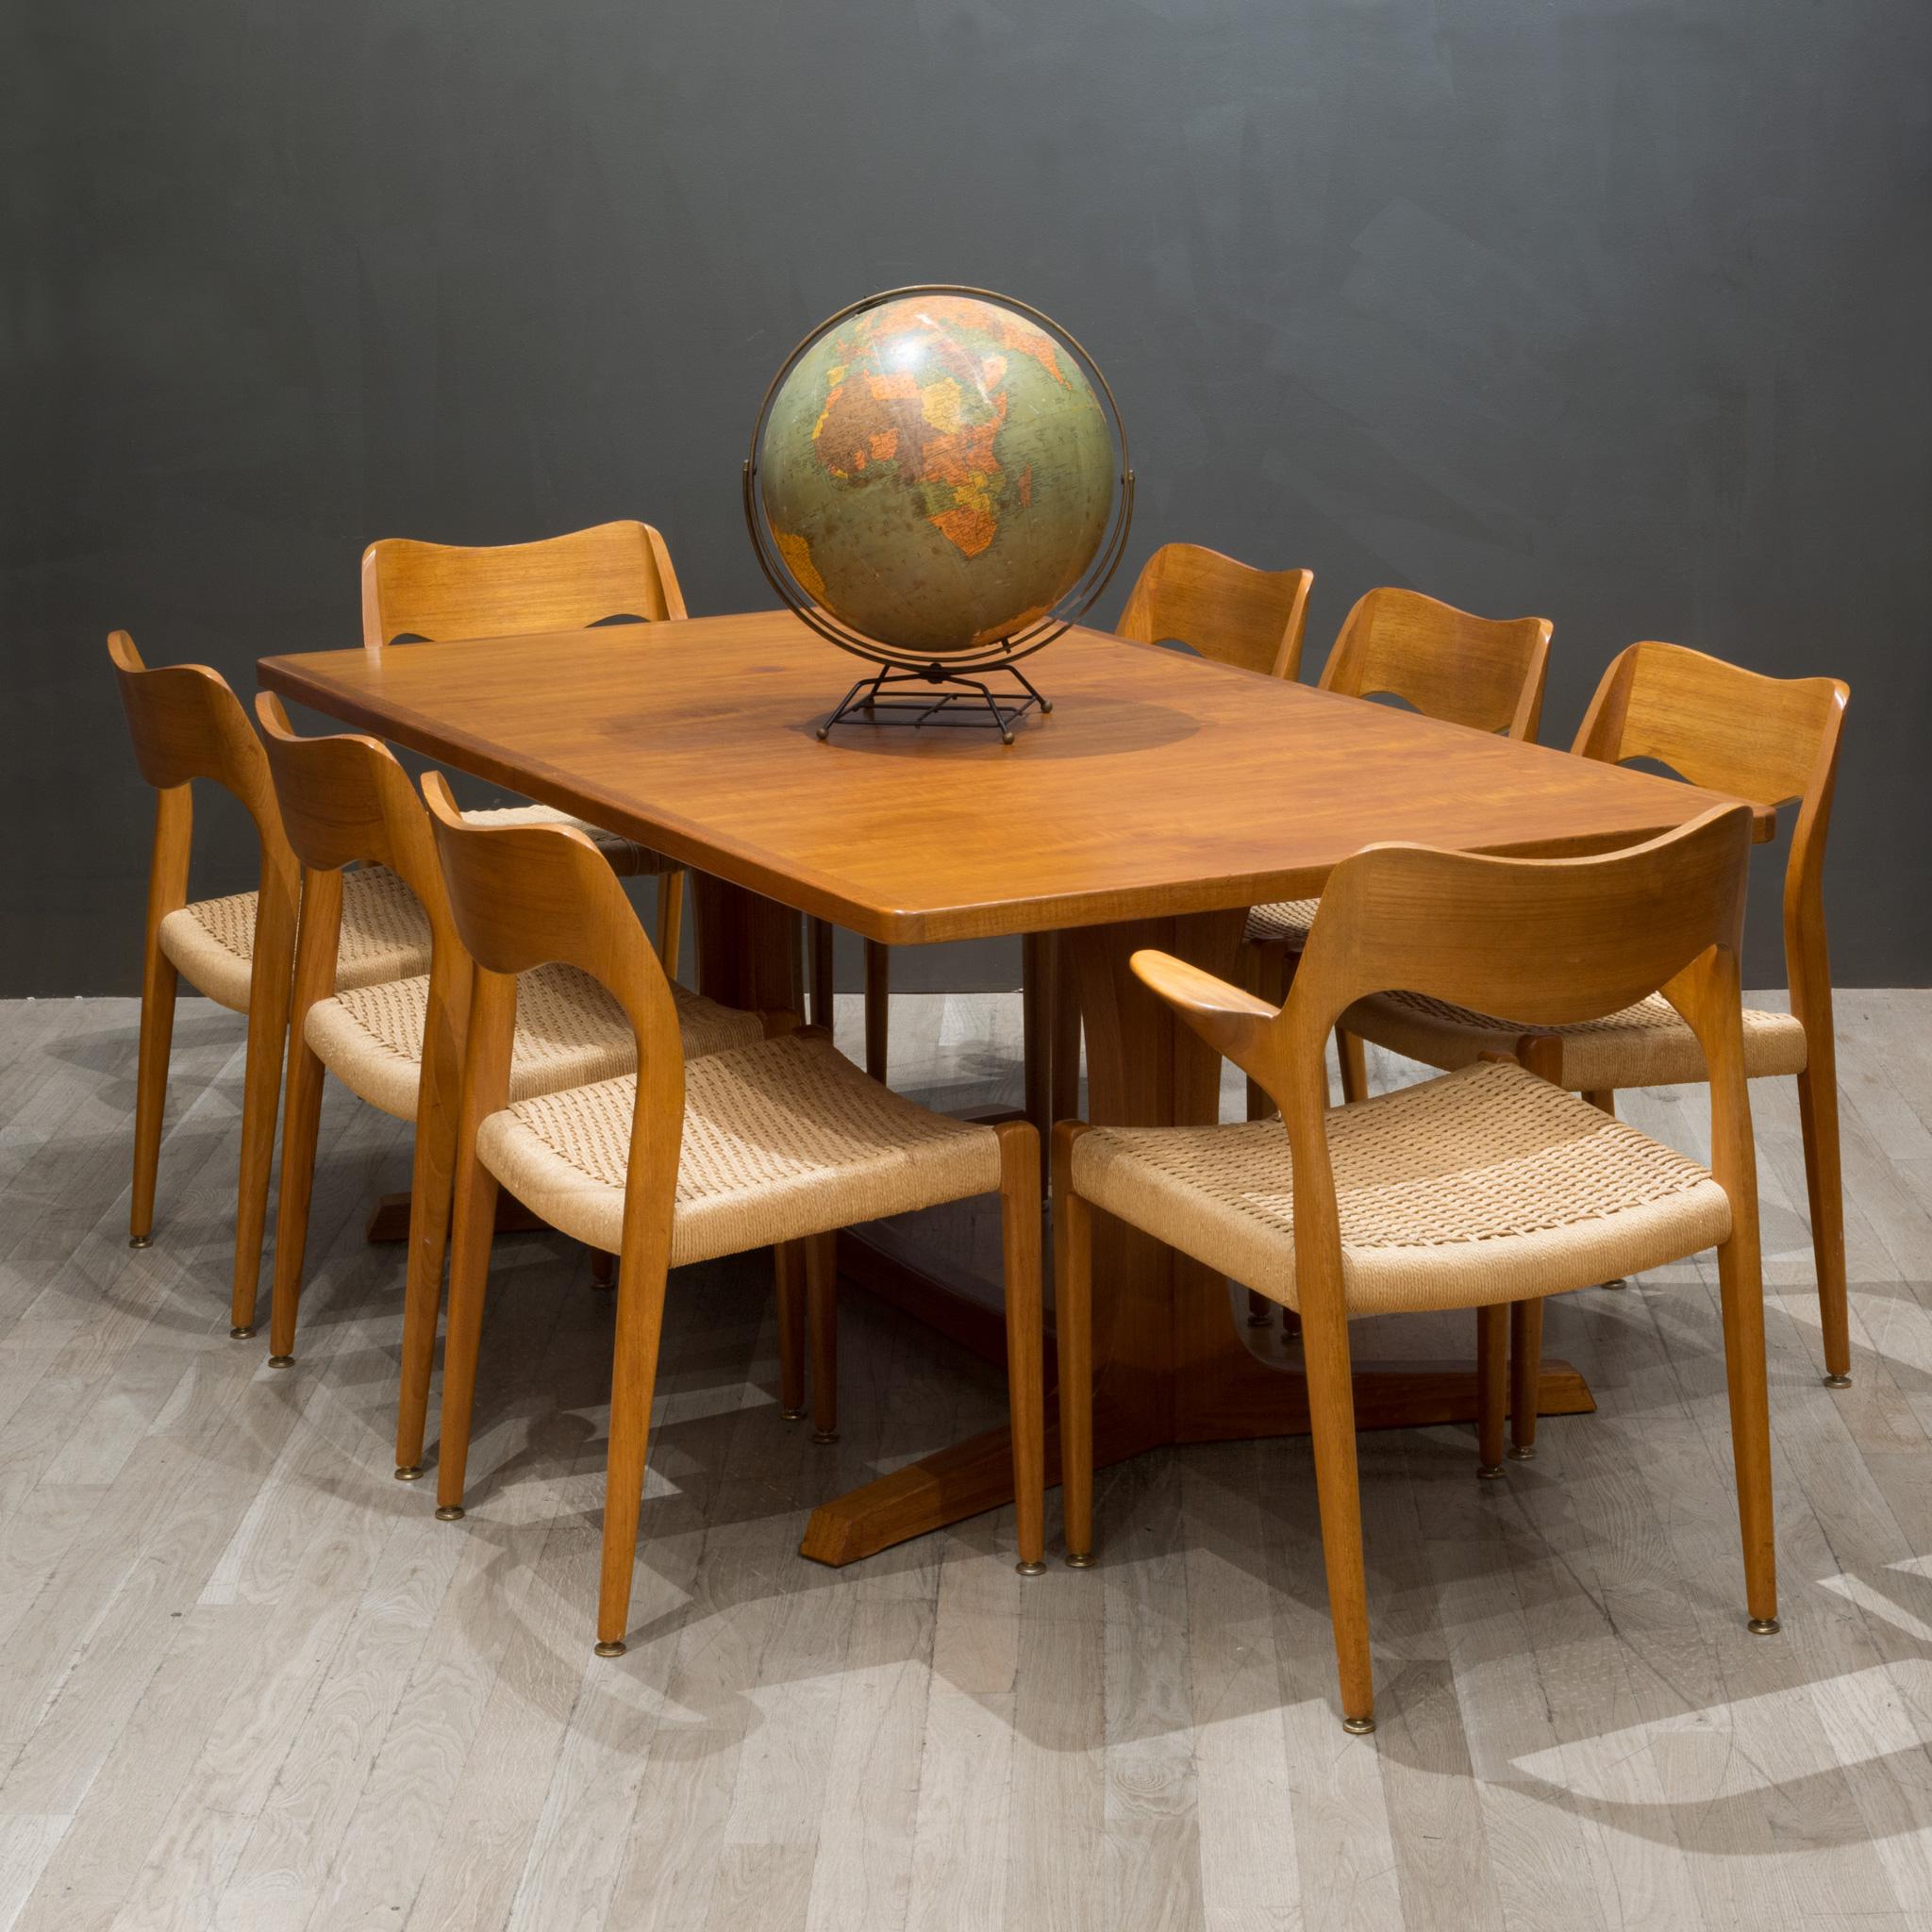 About

Contact us for more shipping options: S16 Home San Francisco. 

An original Gudme Mobelfabrik Gudme solid Teak dining table with two leaves. Seats up to 8 when closed and up to 12 when expanded. Original stamp underneath. Refinished in an oil